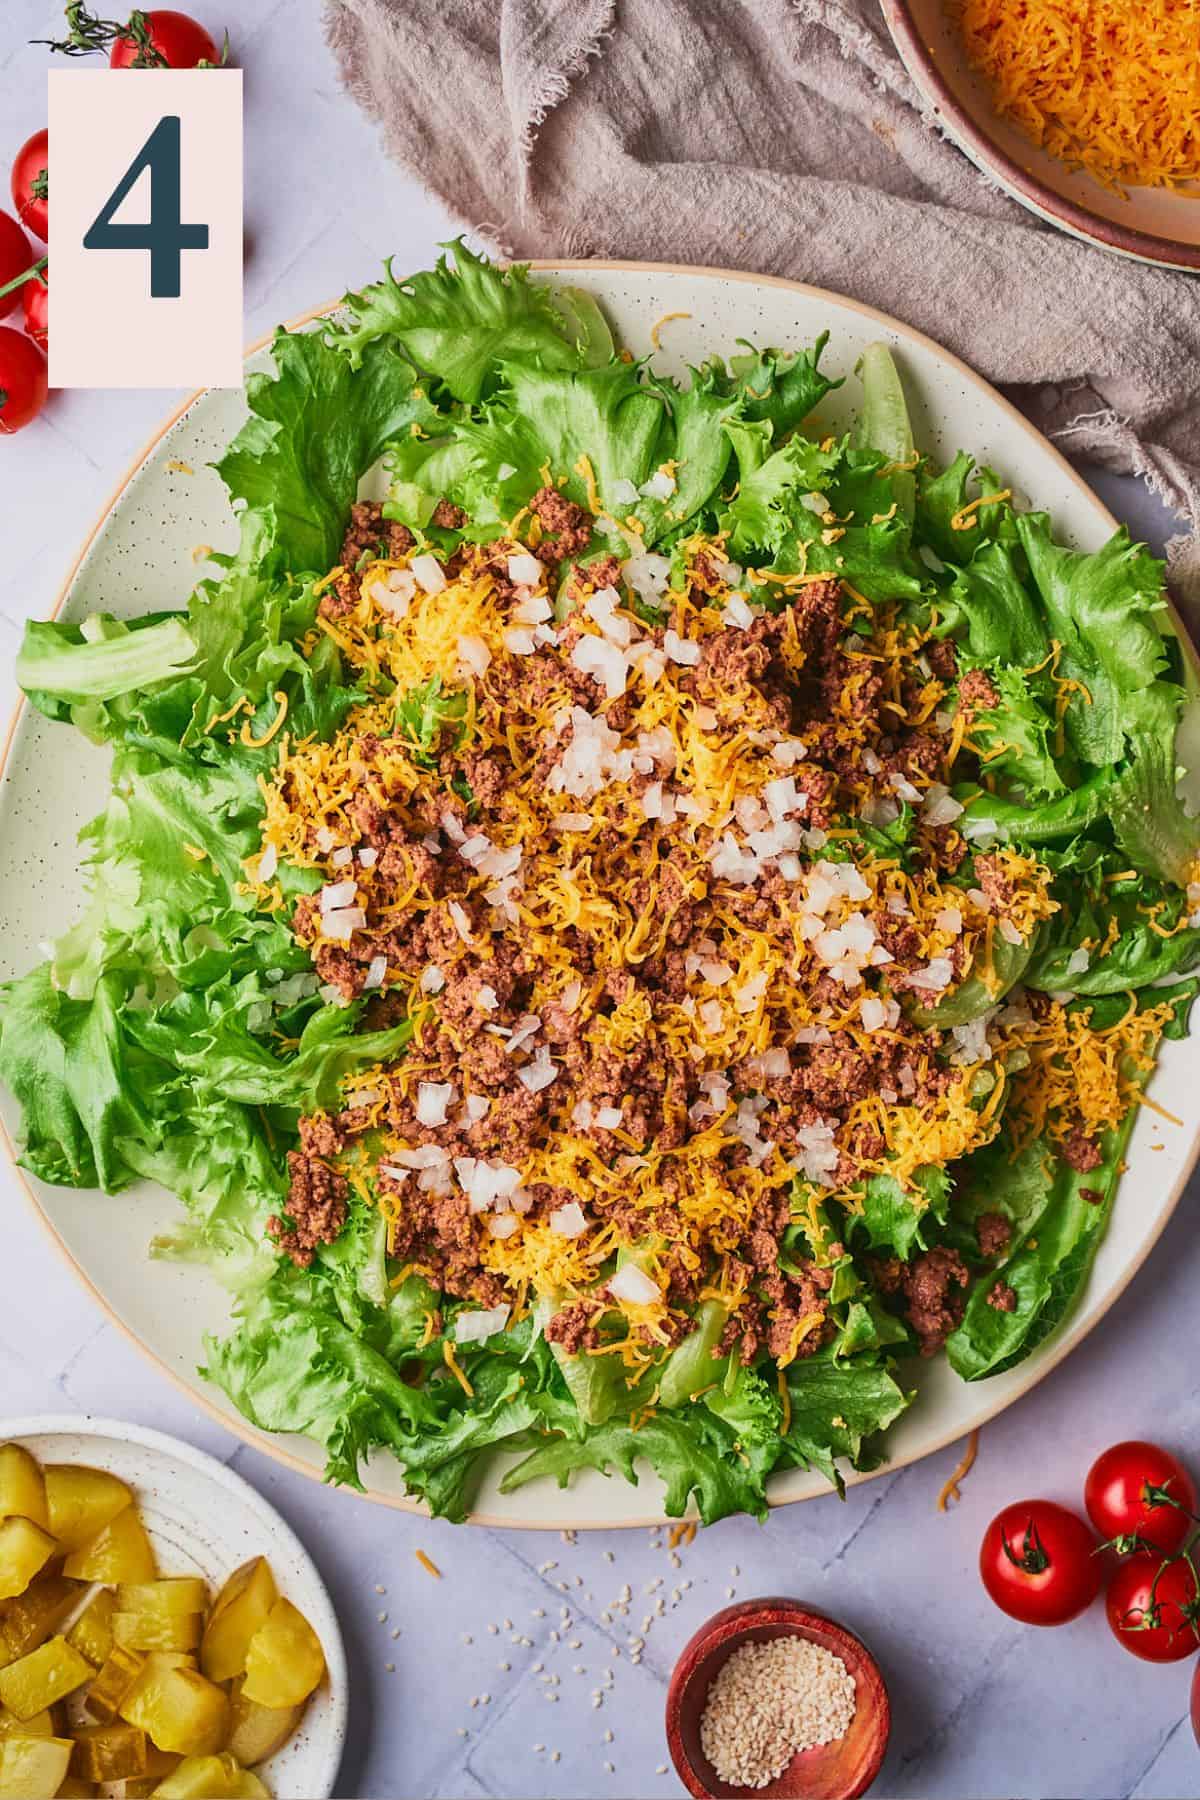 bed of lettuce topped with cooked ground beef, onions, and cheese.